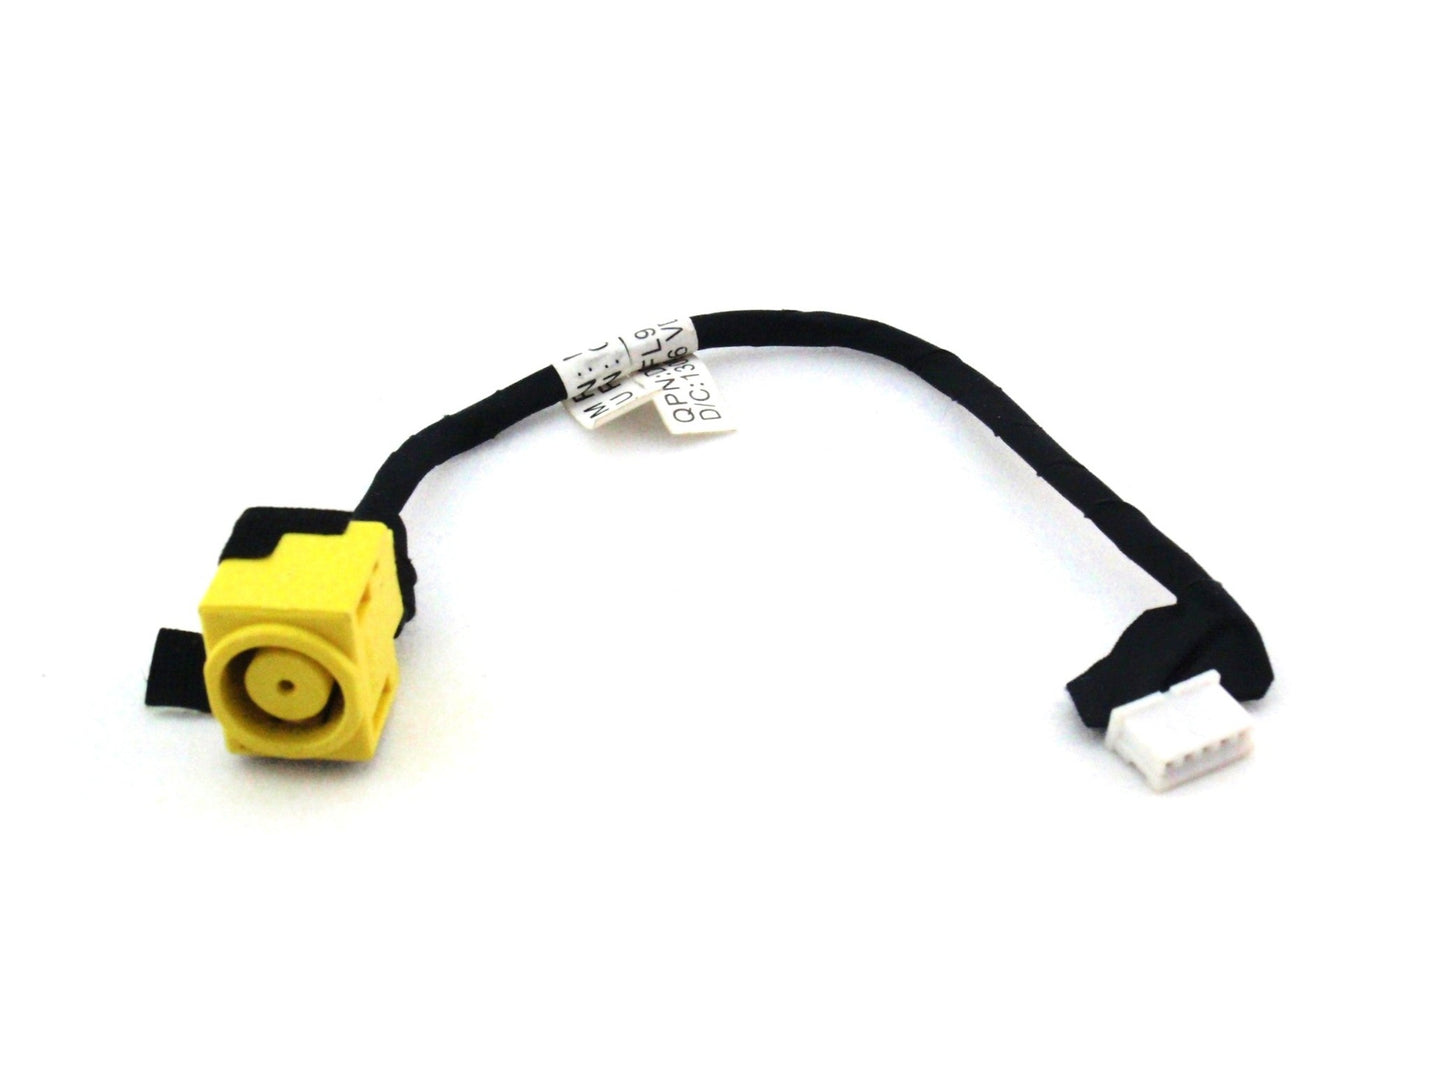 IBM Lenovo New DC In Power Jack Charging Port Connector Socket Cable ThinkPad X130e X131e DDFL9BAD000 04W3558